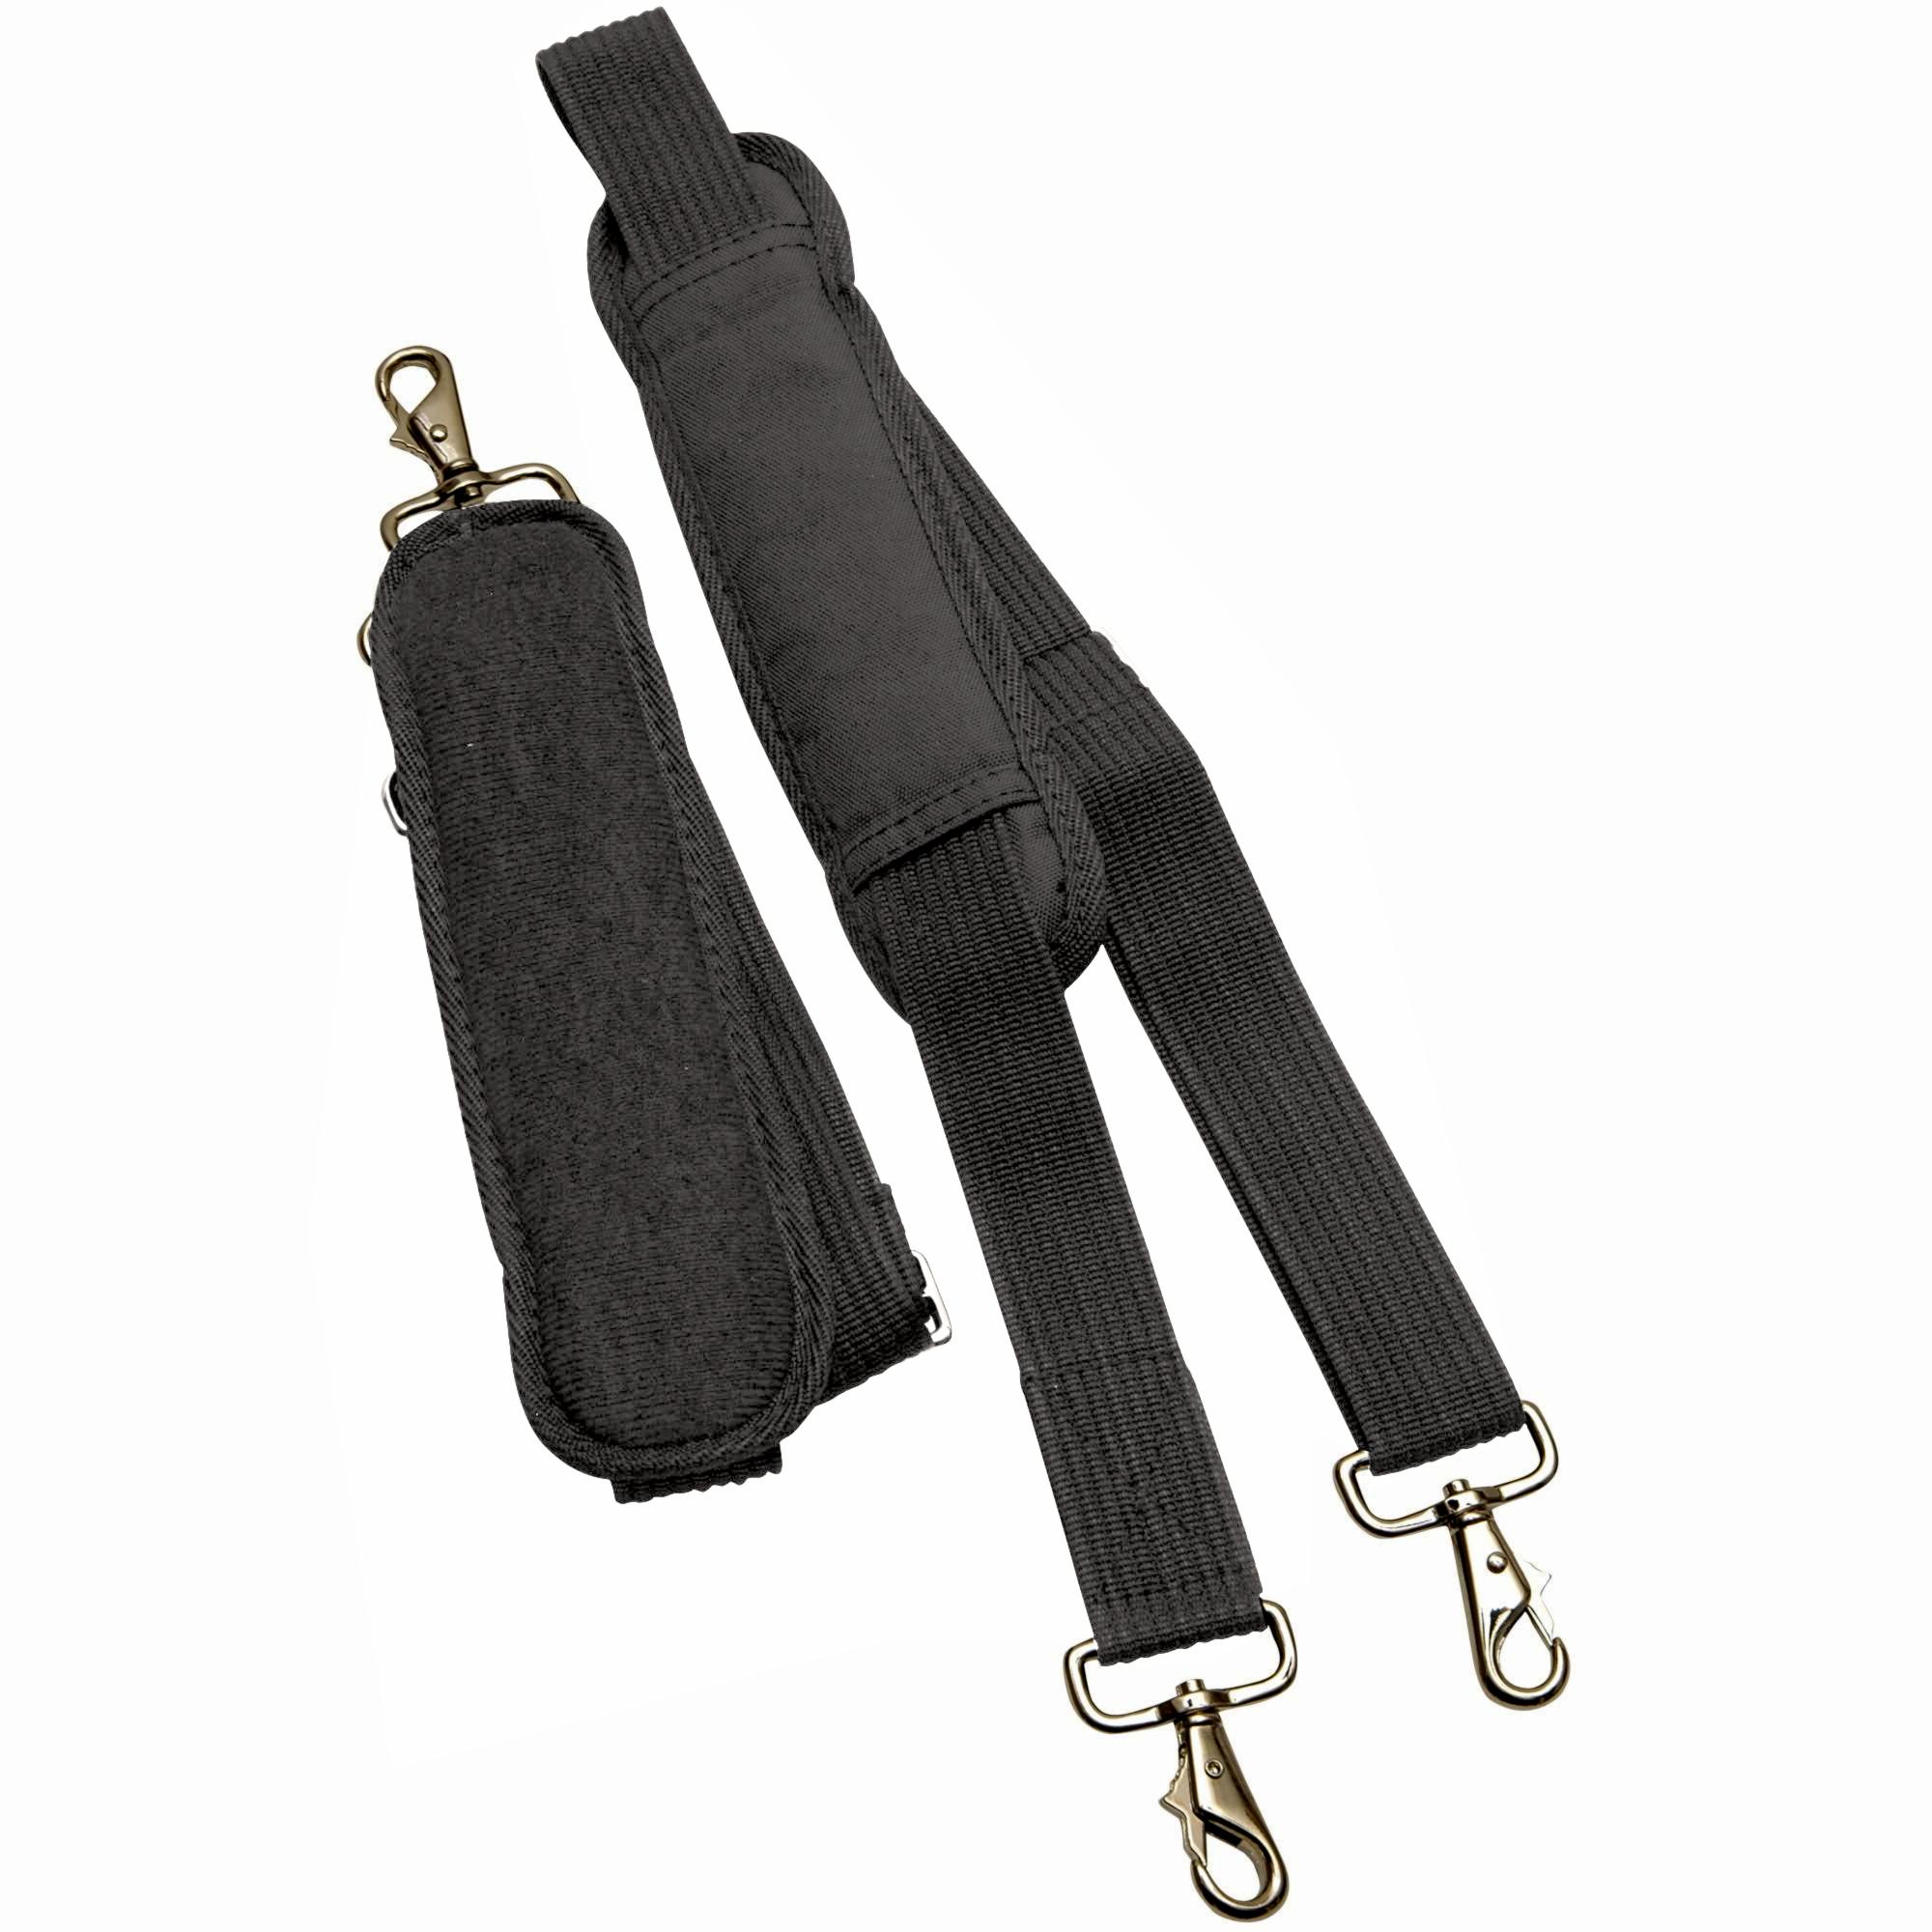 Case and Bag Straps